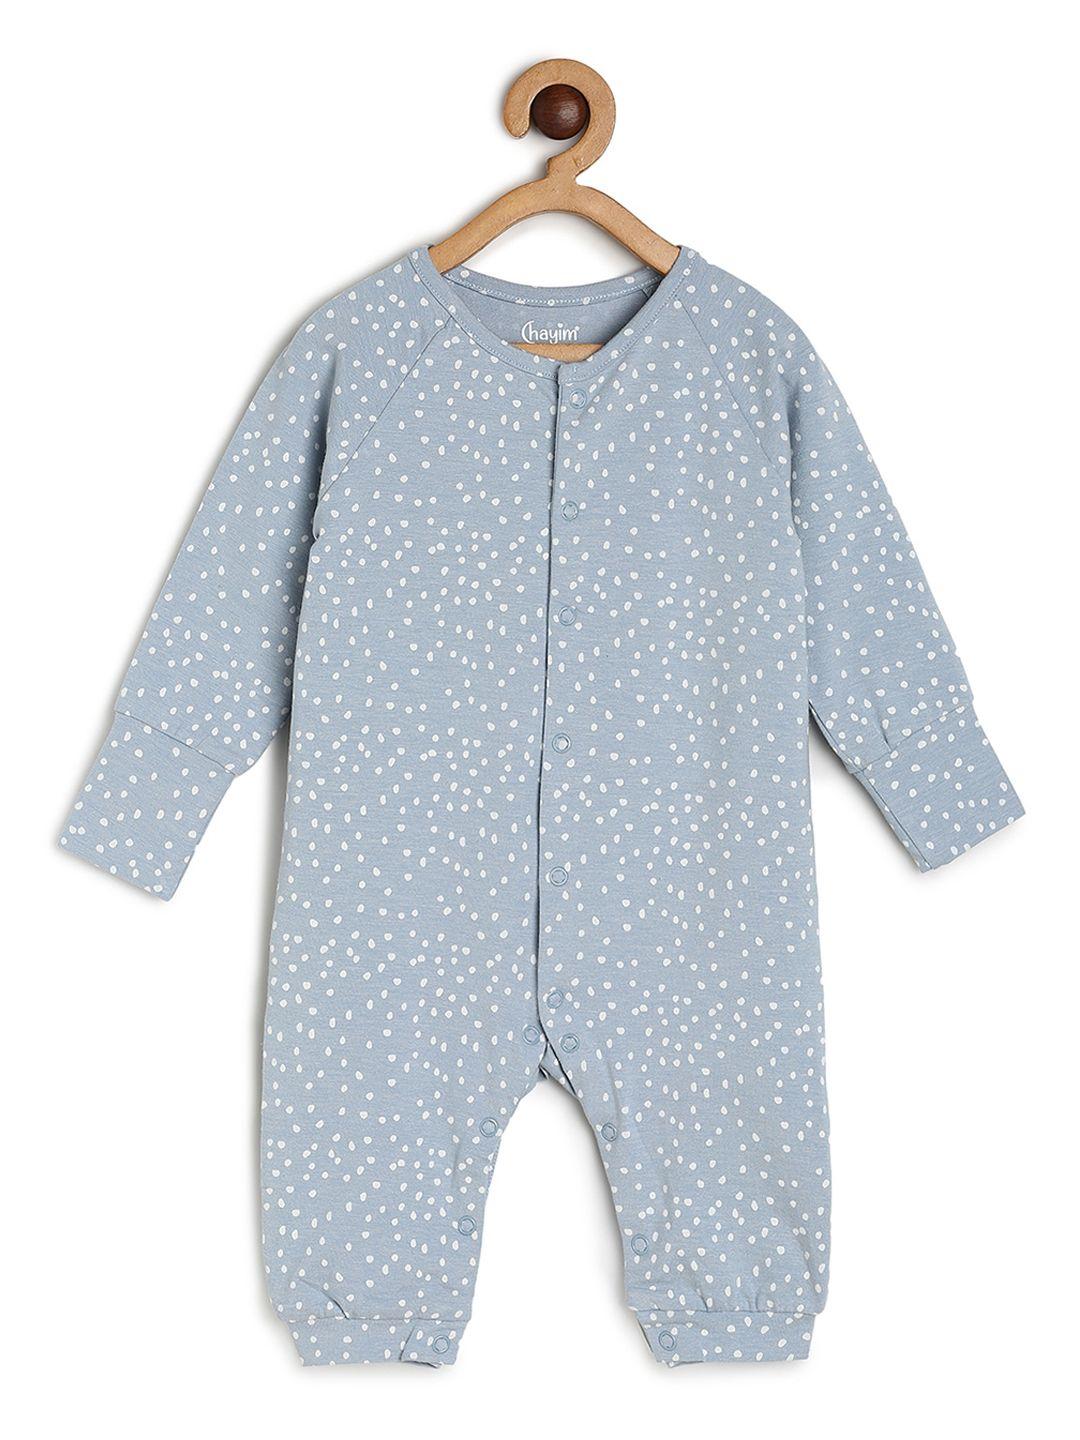 chayim infants printed open front romper